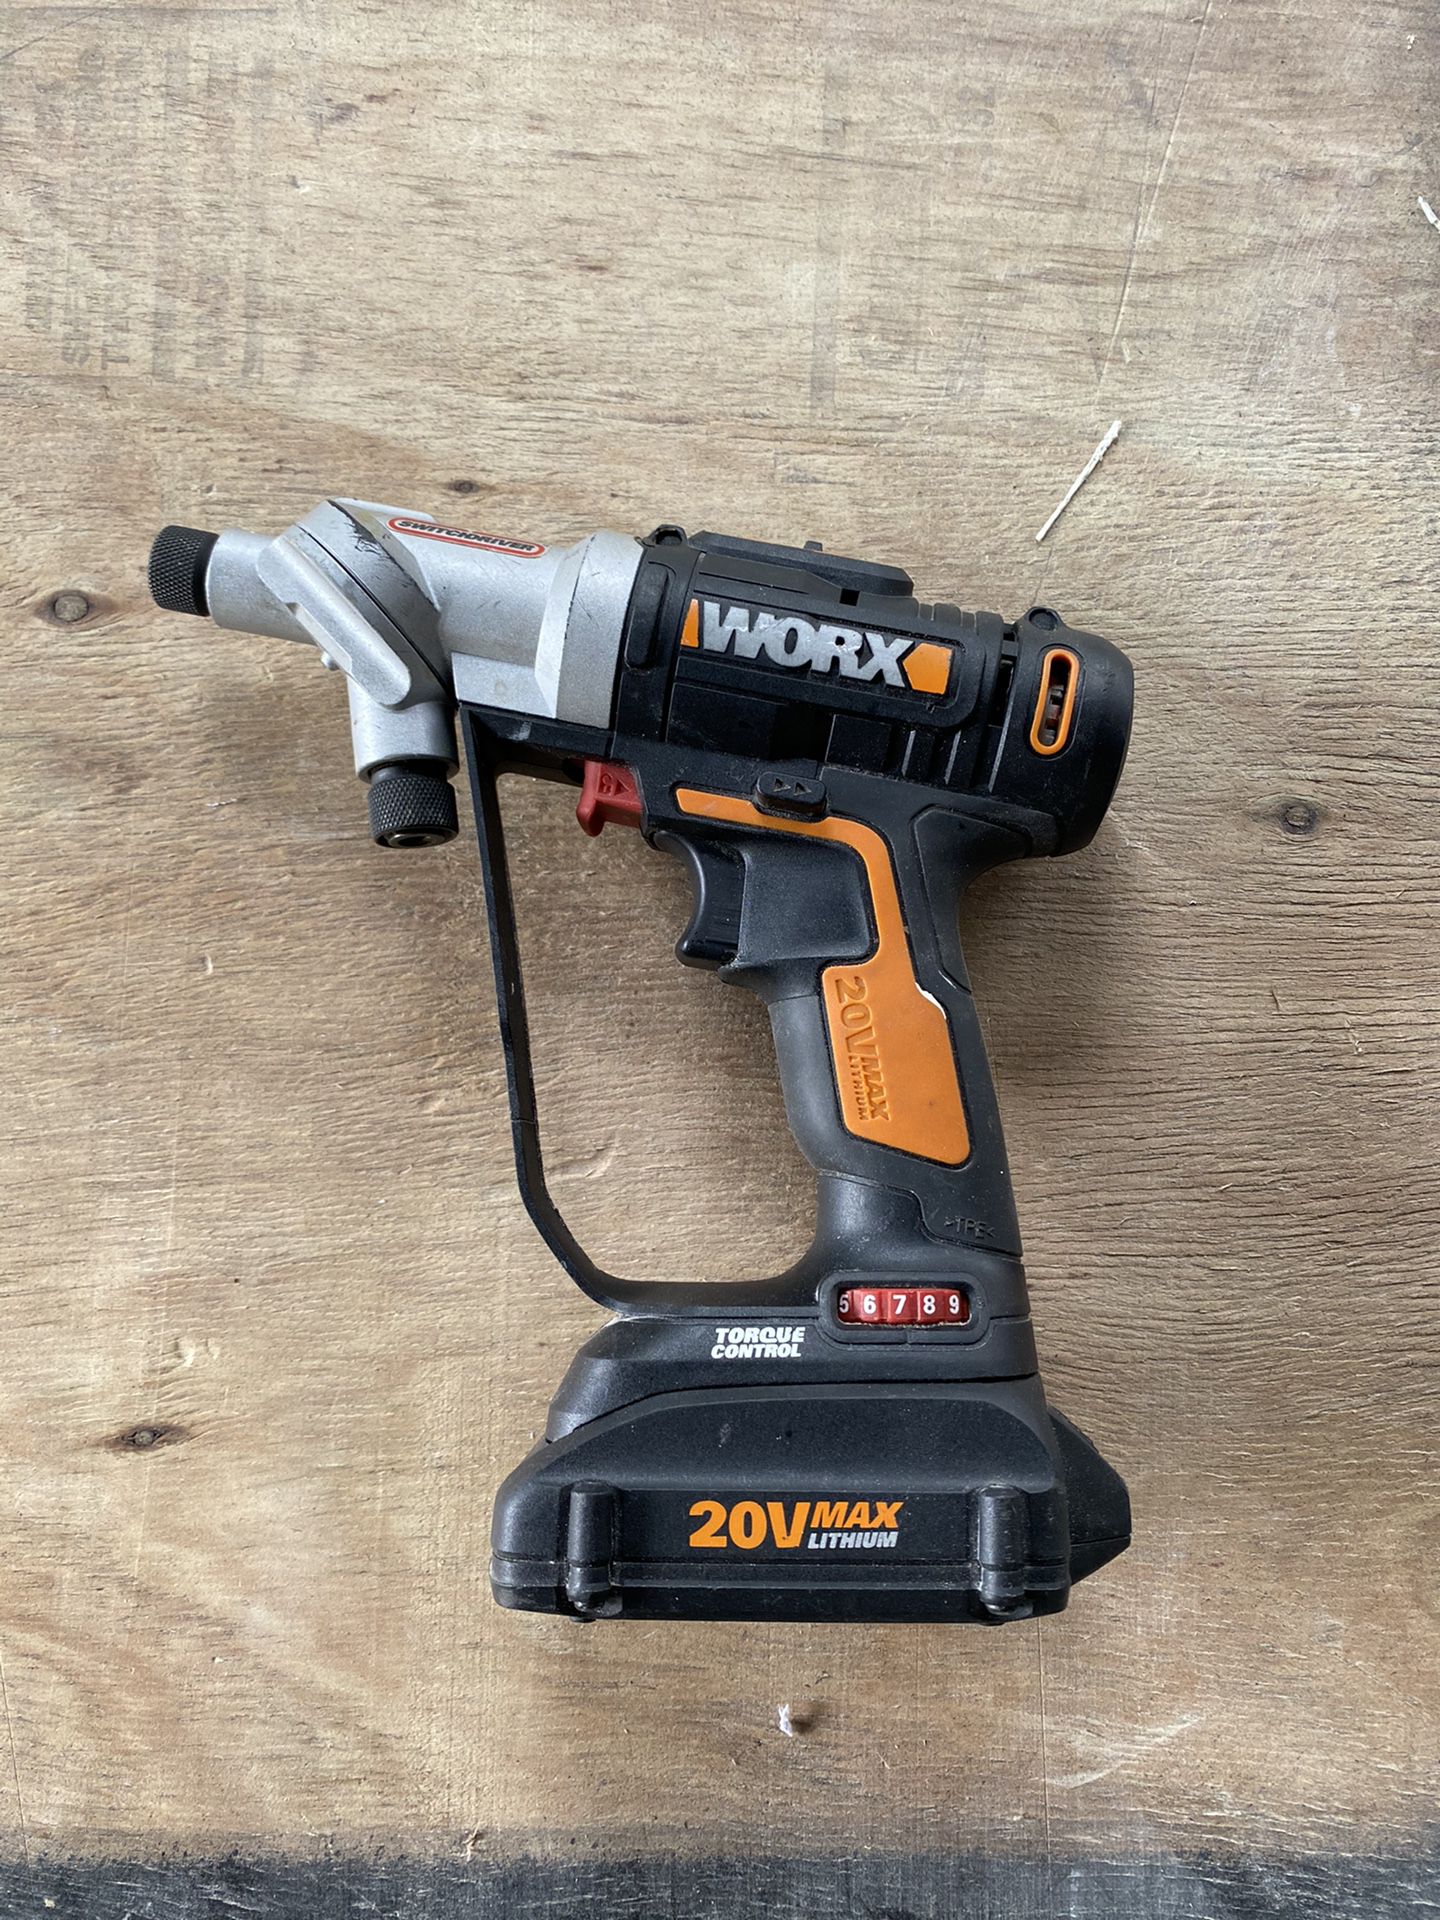 WORX SwitchDriver drill/driver all in one. 2 batteries and charger